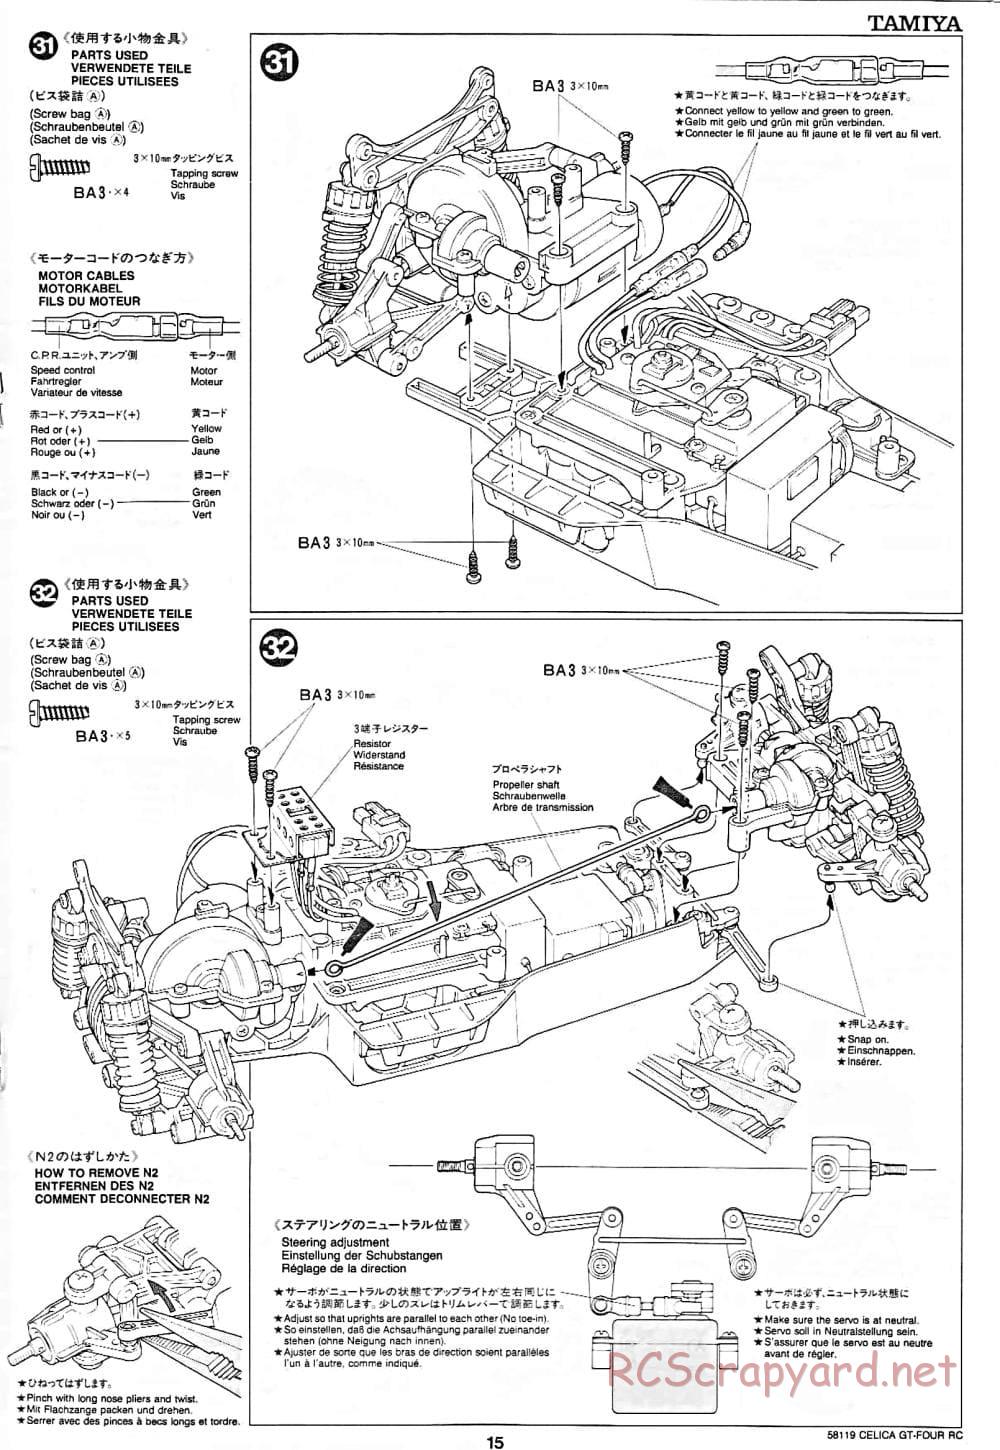 Tamiya - Toyota Celica GT-Four RC - TA-01 Chassis - Manual - Page 15